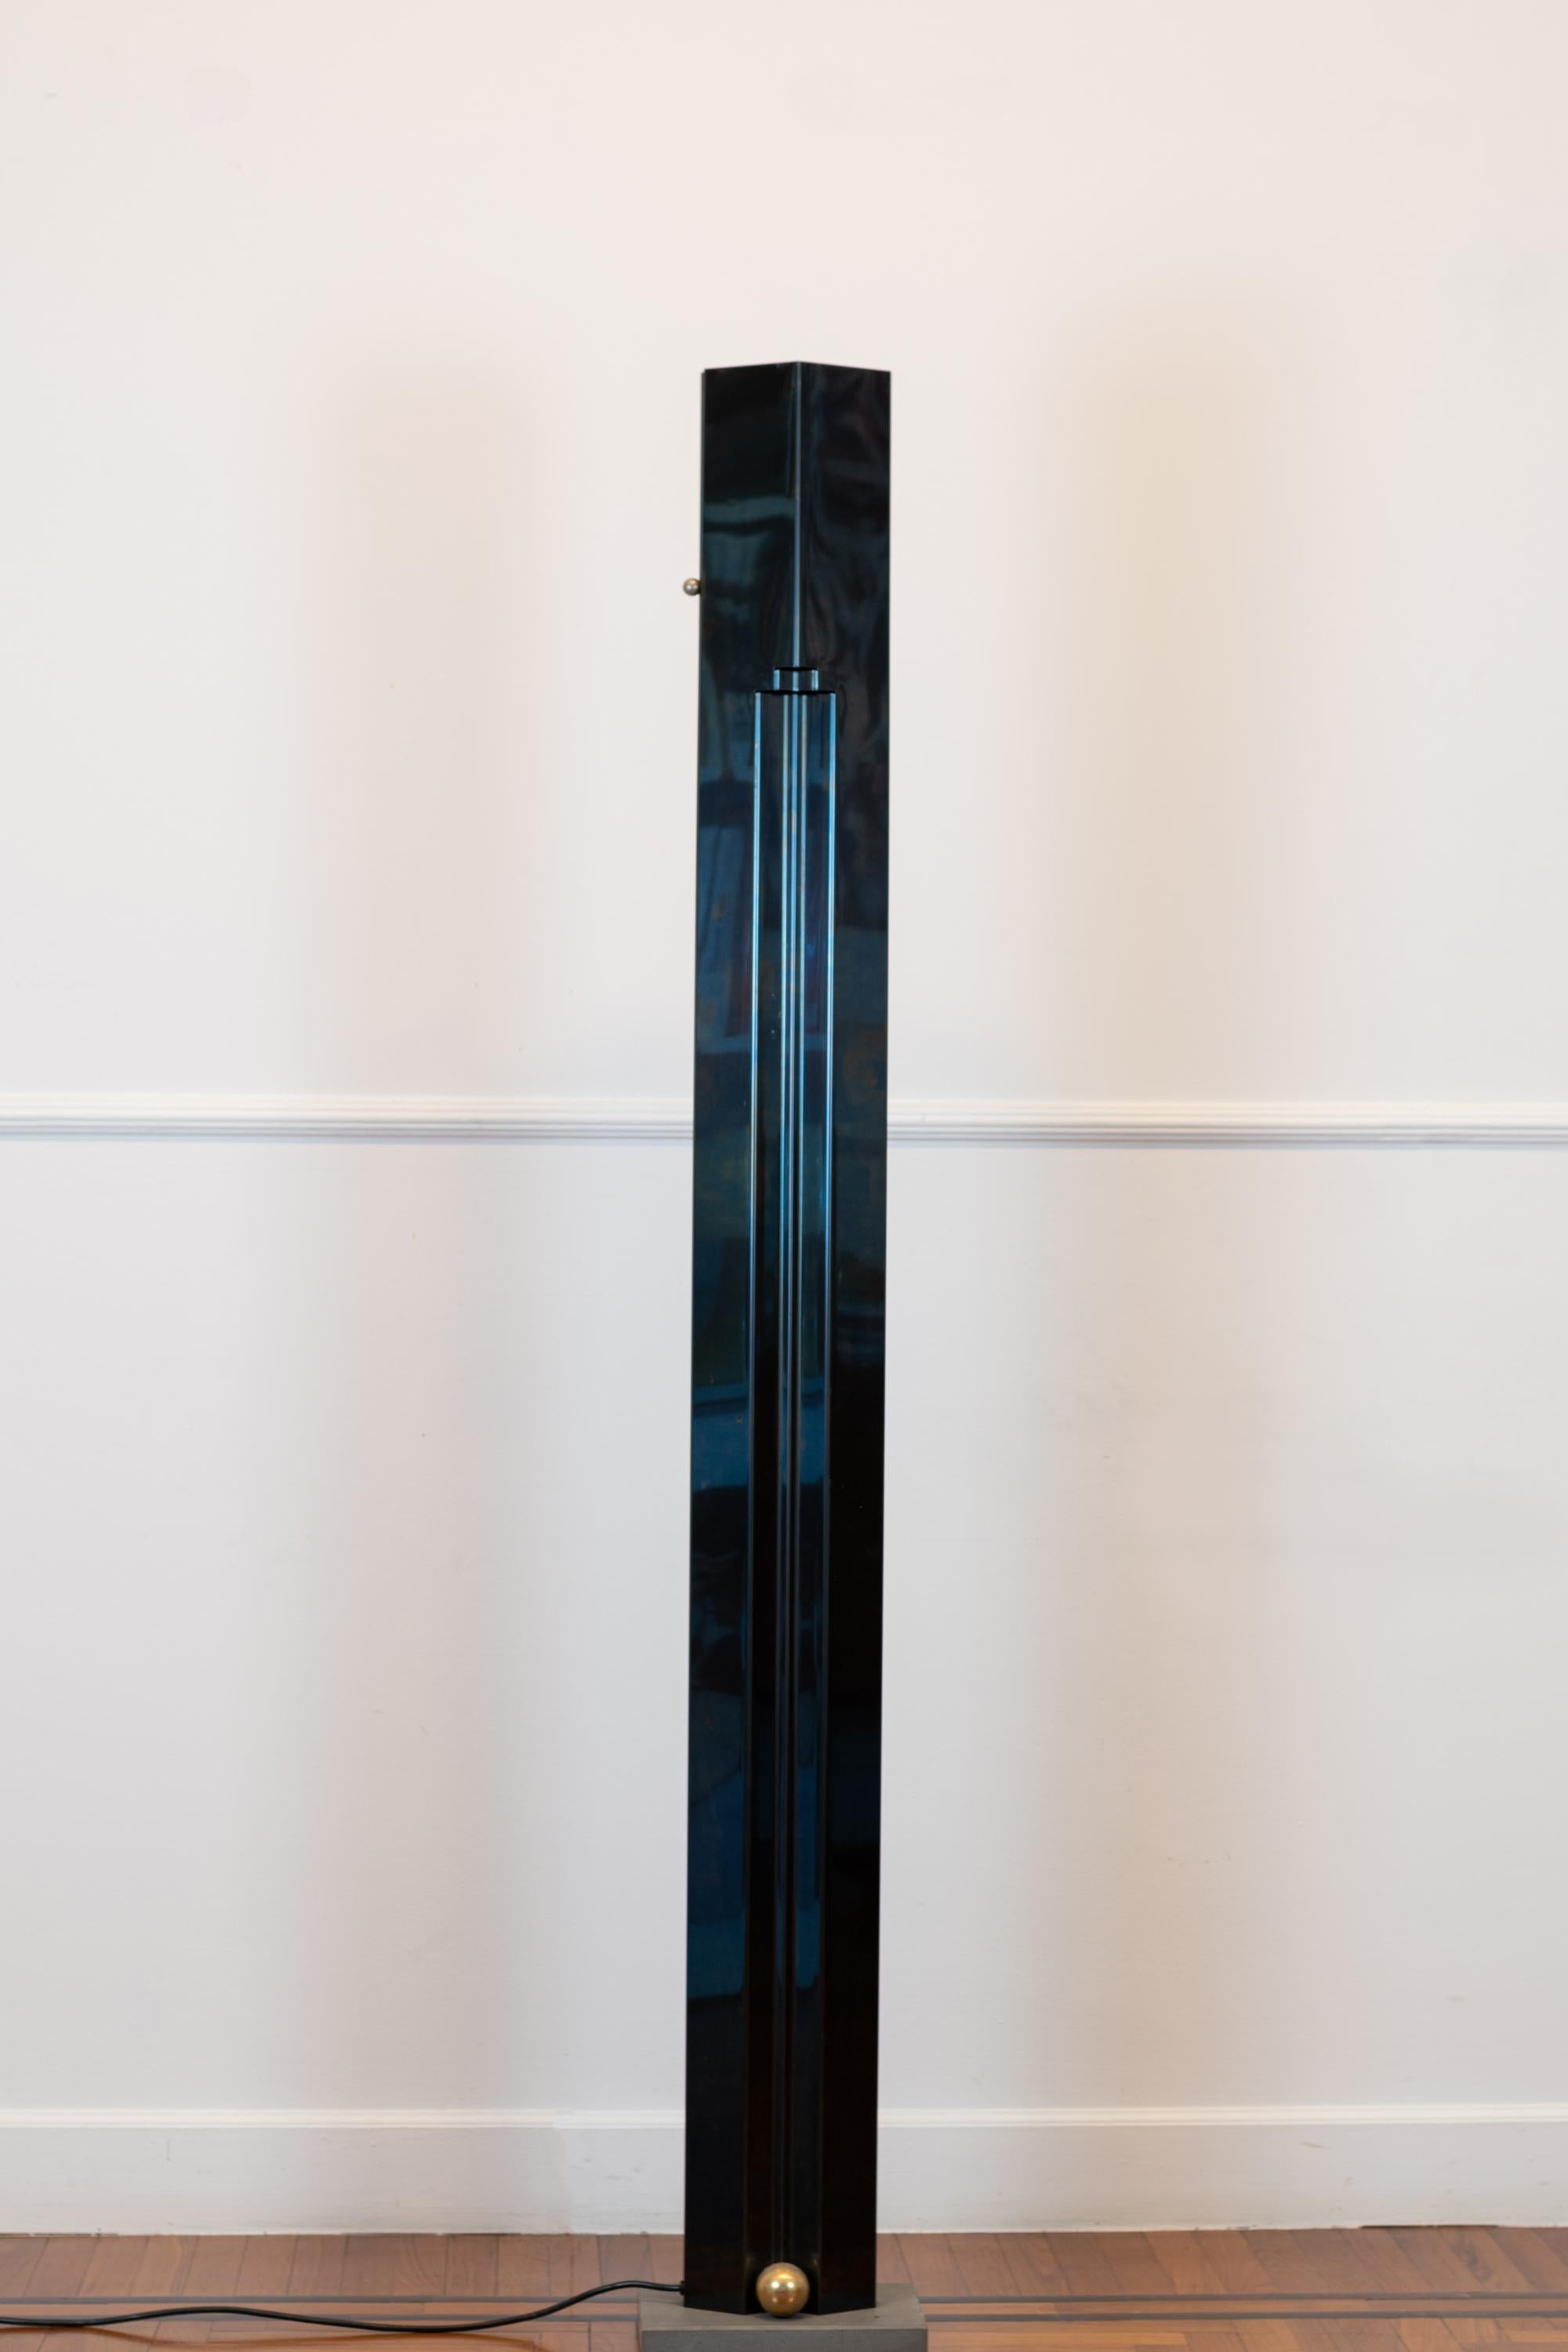 Totem floor lamp design by Kazuhide Takaham for Sirrah, 1982, Italy.
The body is galvanized stainless steel in blue iridescent surface finish, and the base in sandstone.
Manufacturer Brand under the base.

Literature: Domus n. 638, April 1983,